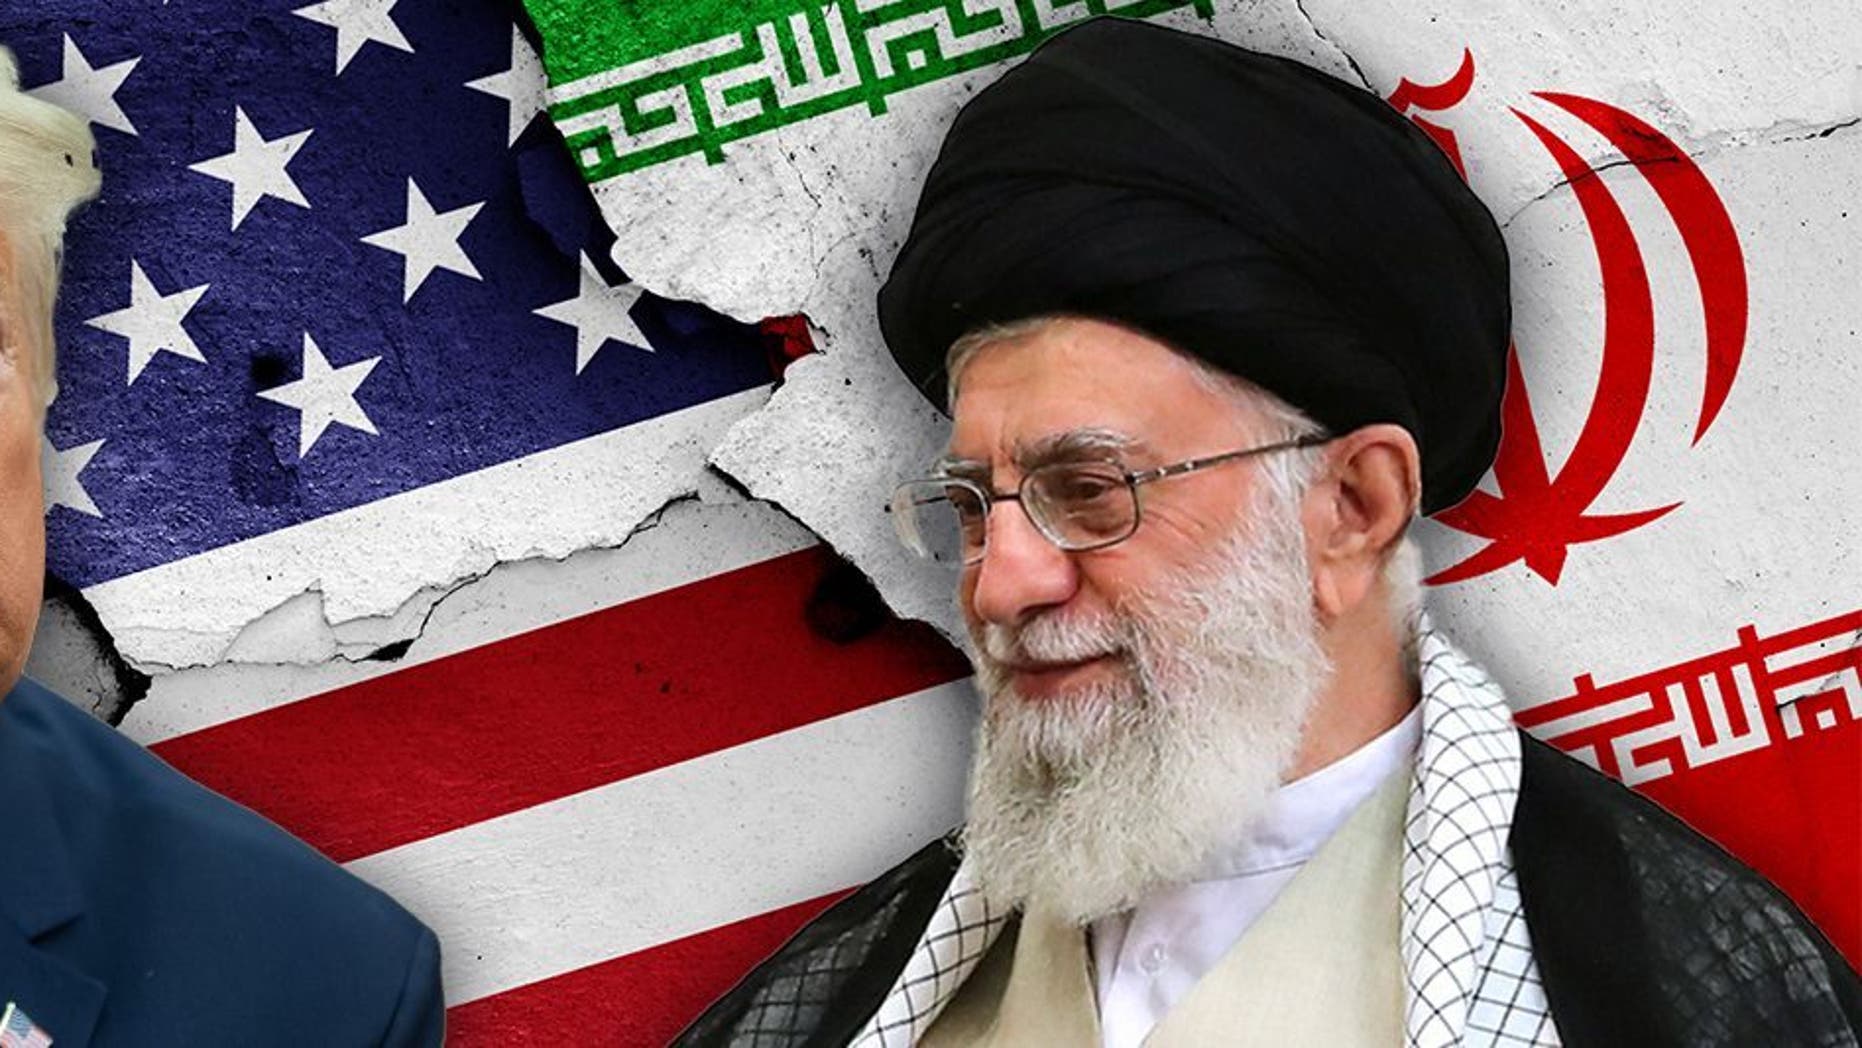 iran-versus-america-who-will-win-if-the-war-broke-out